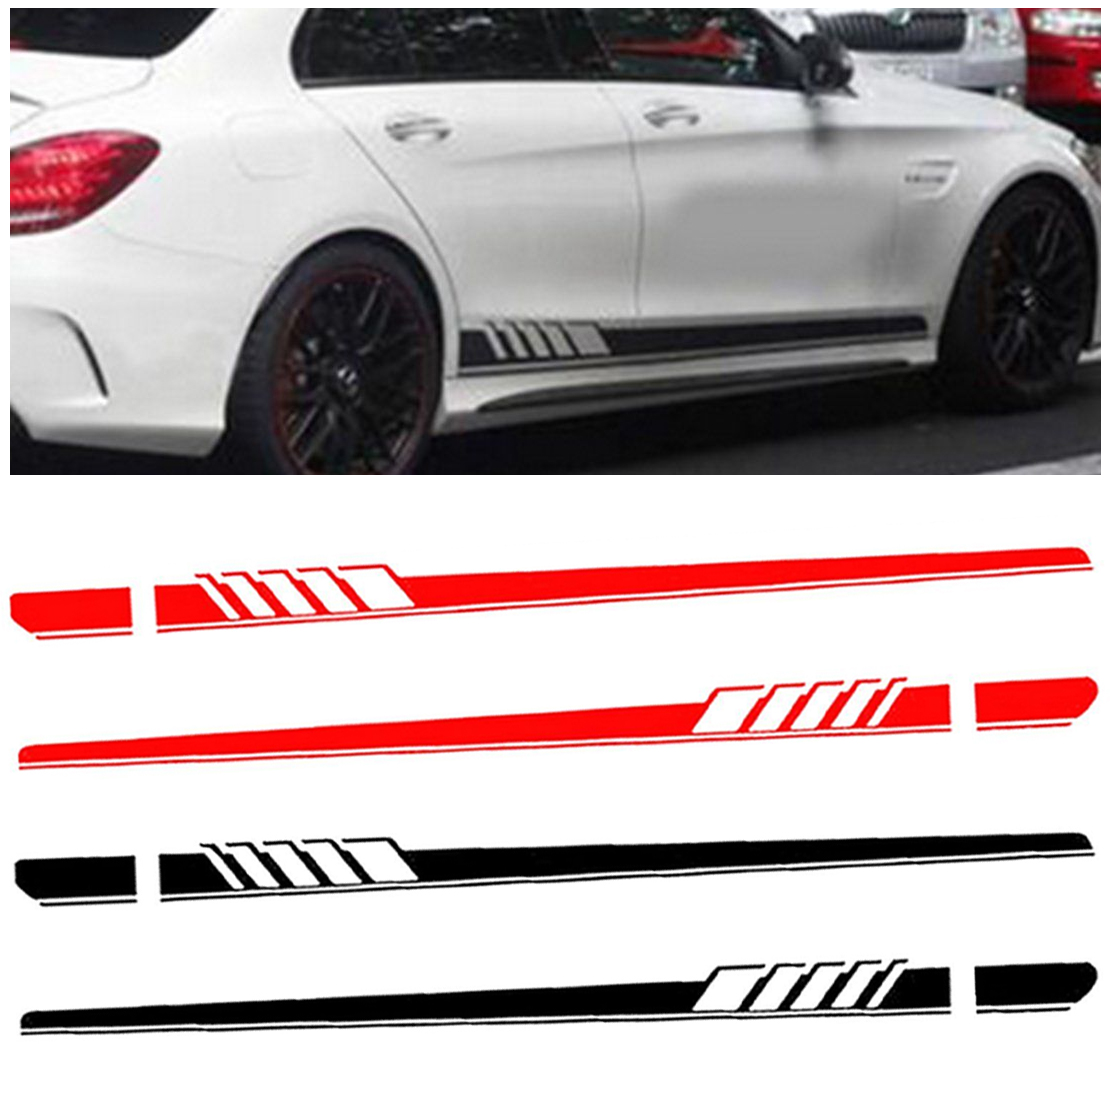 2Pcs Sports Racing Car Graphics Both Side Body Vinyl Long Stripe Decal Stickers